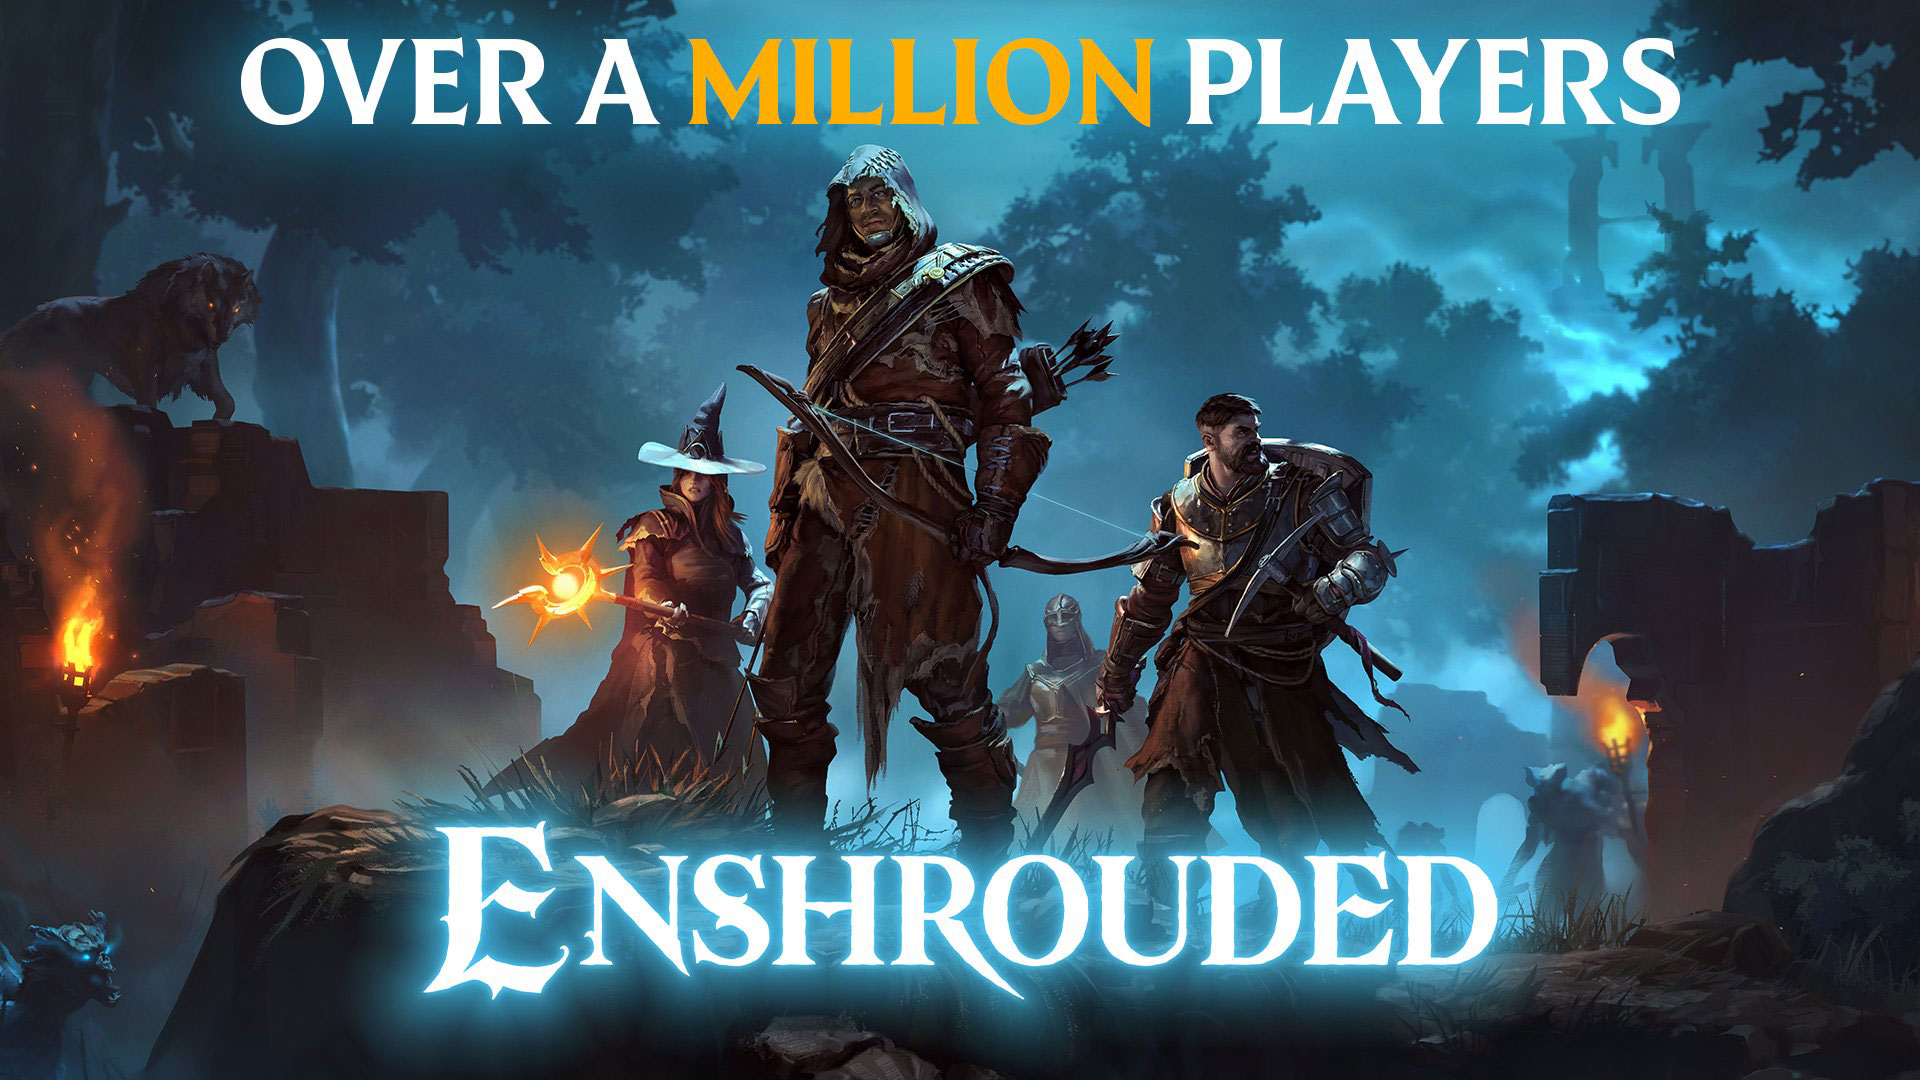 In just four days, Enshrouded has reached over one million players